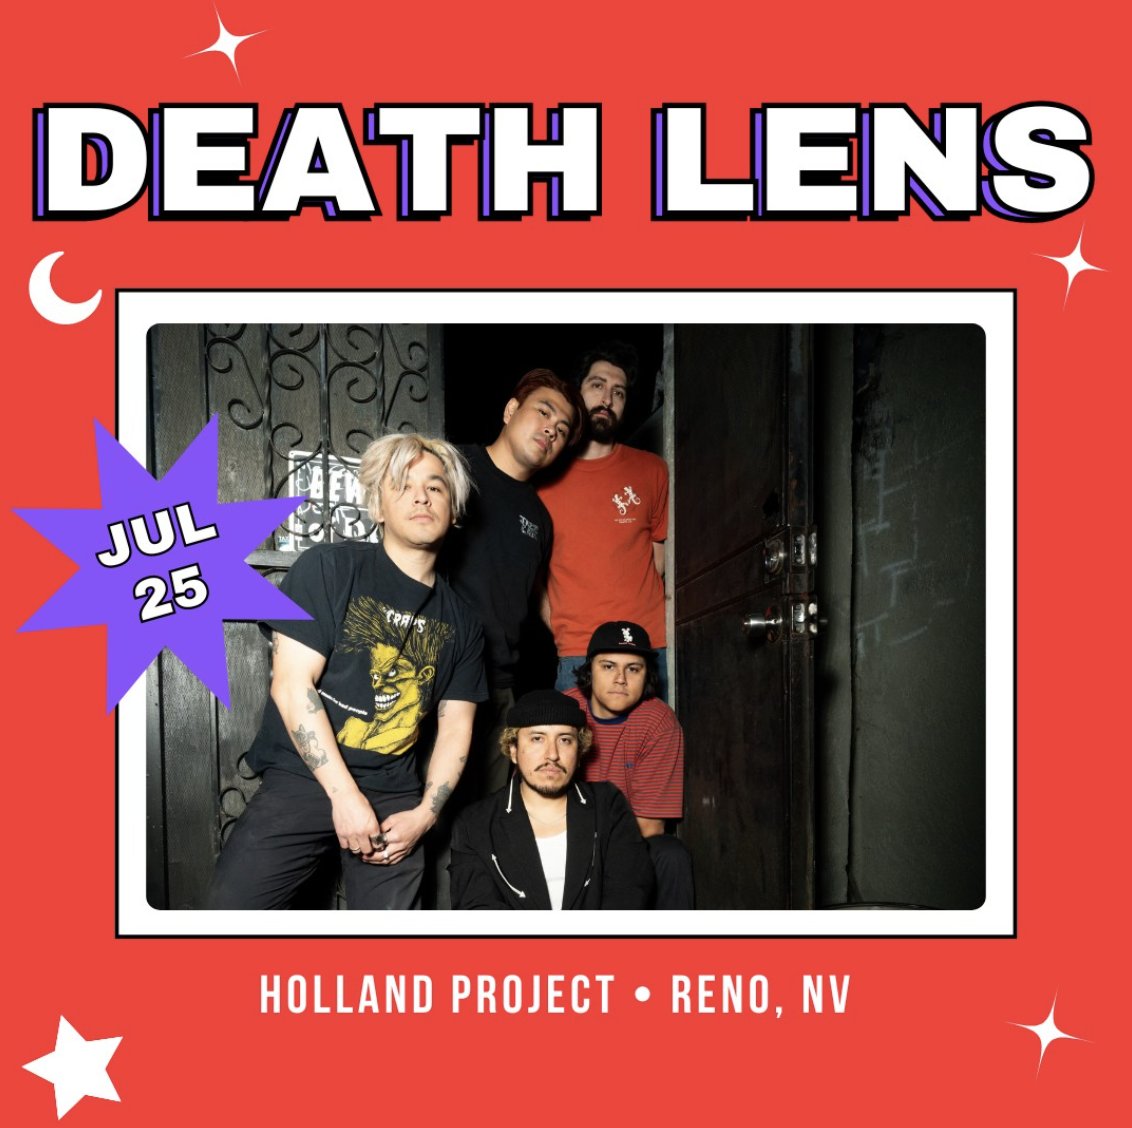 ON SALE NOW! 🌟 We're excited to announce the East LA alternative punk band, DEATH LENS, is returning on July 25th for their album release headlining tour w/ support from Strawberry Fuzz, and Grave Secrets, get ur tix at hollandreno[.]org